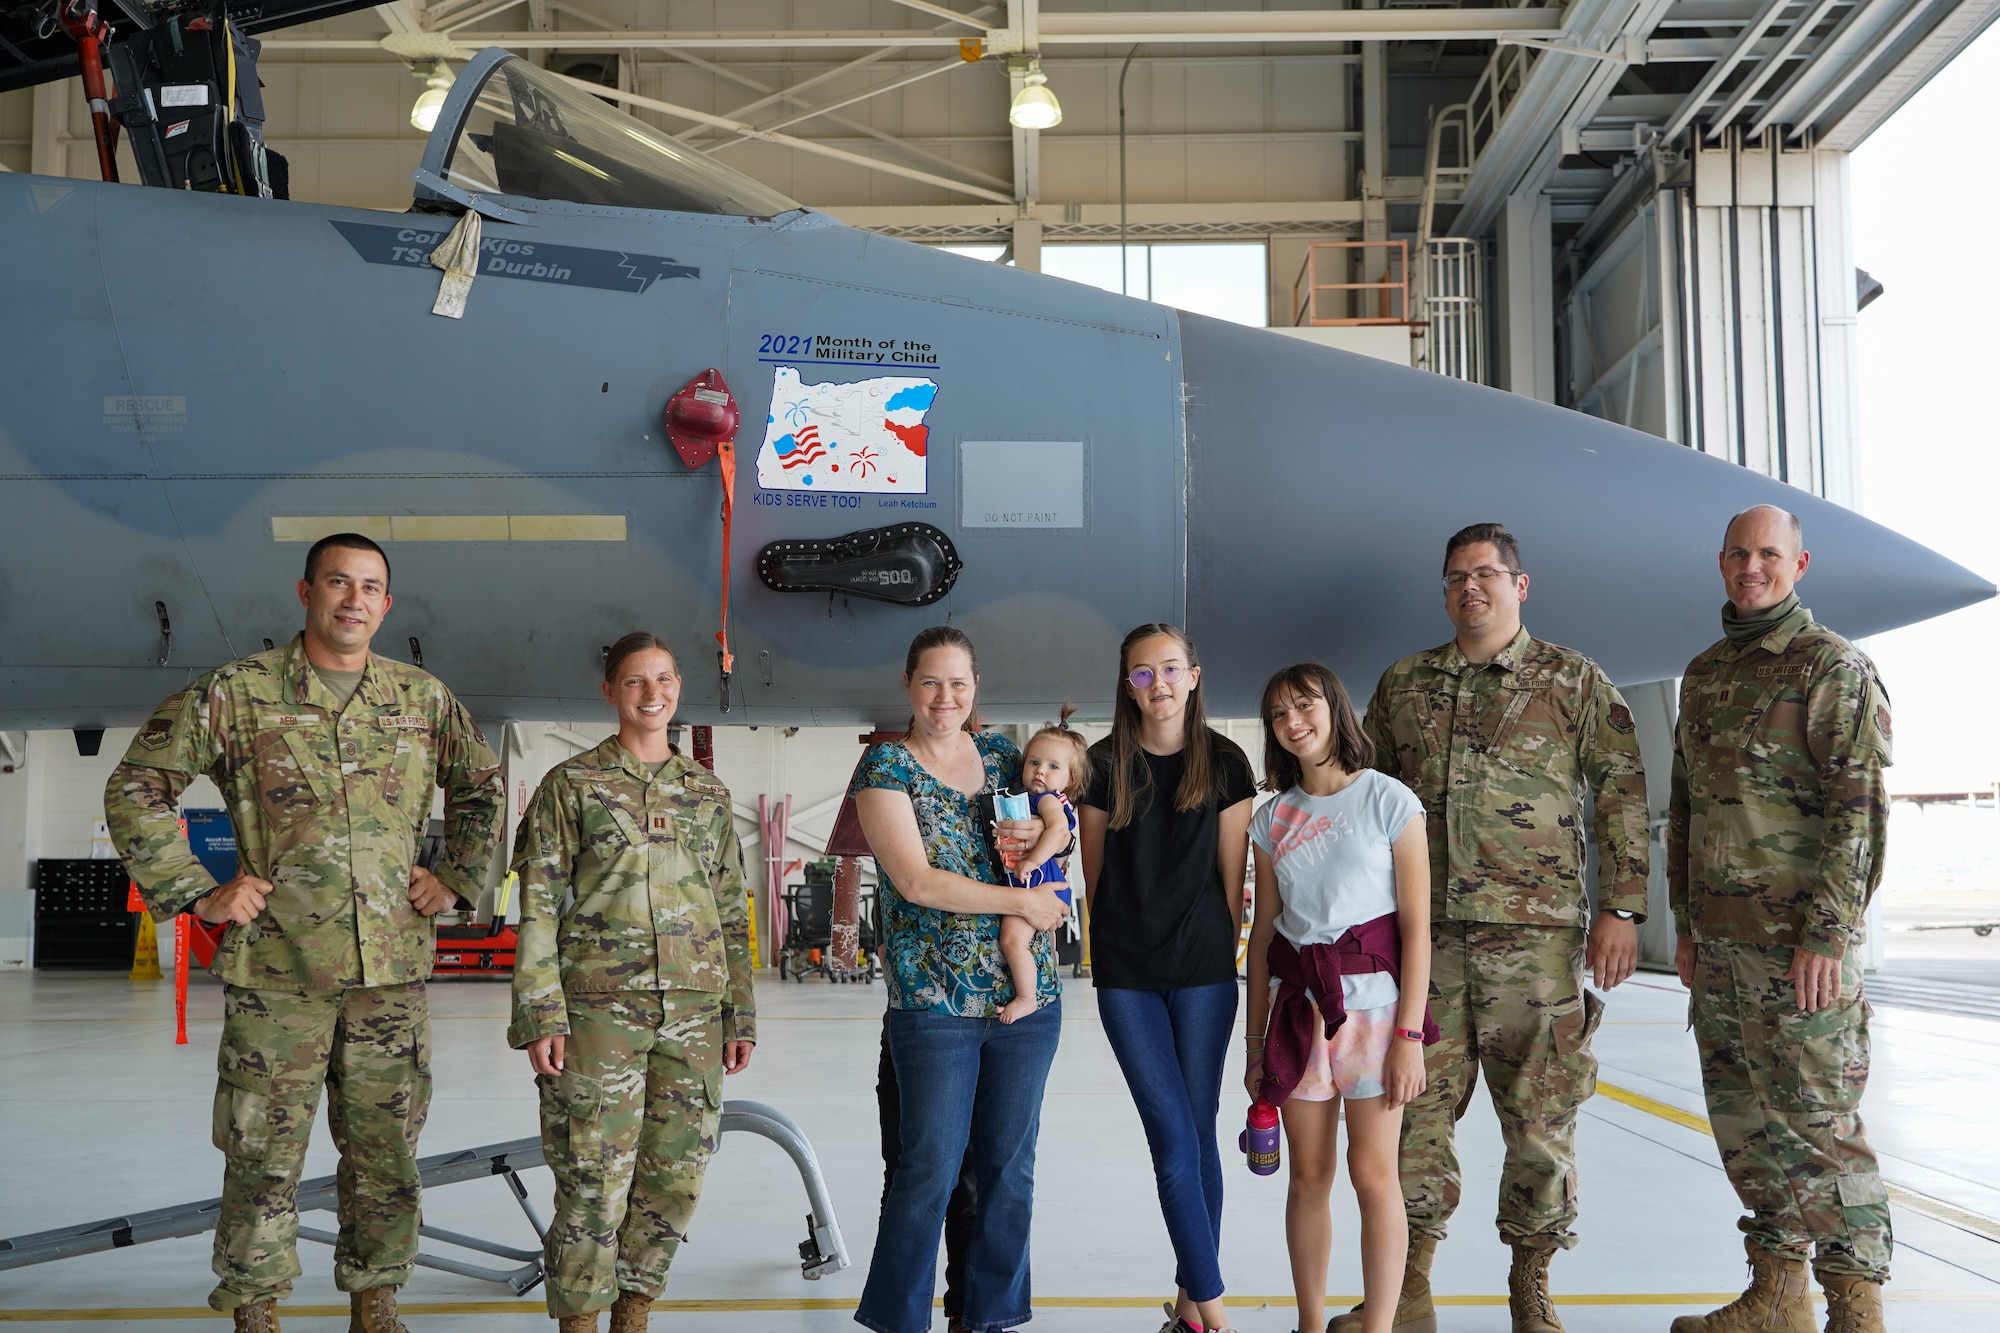 Leah Ketchum and her family along with members of the 142nd Maintenance Group pose for a photo in front of a 142nd Wing F-15 Eagle that now displays her artwork on its nose on August 12, 2021 in Portland, Ore. The 142nd Wing and the 173rd Fighter Wing both held contests in support of Month of the Military Child in which each wing chose one winner to have their designs applied to fighter jets at their respective wings. (U.S. Air National Guard Photo by Staff. Sgt. Alexander Frank)